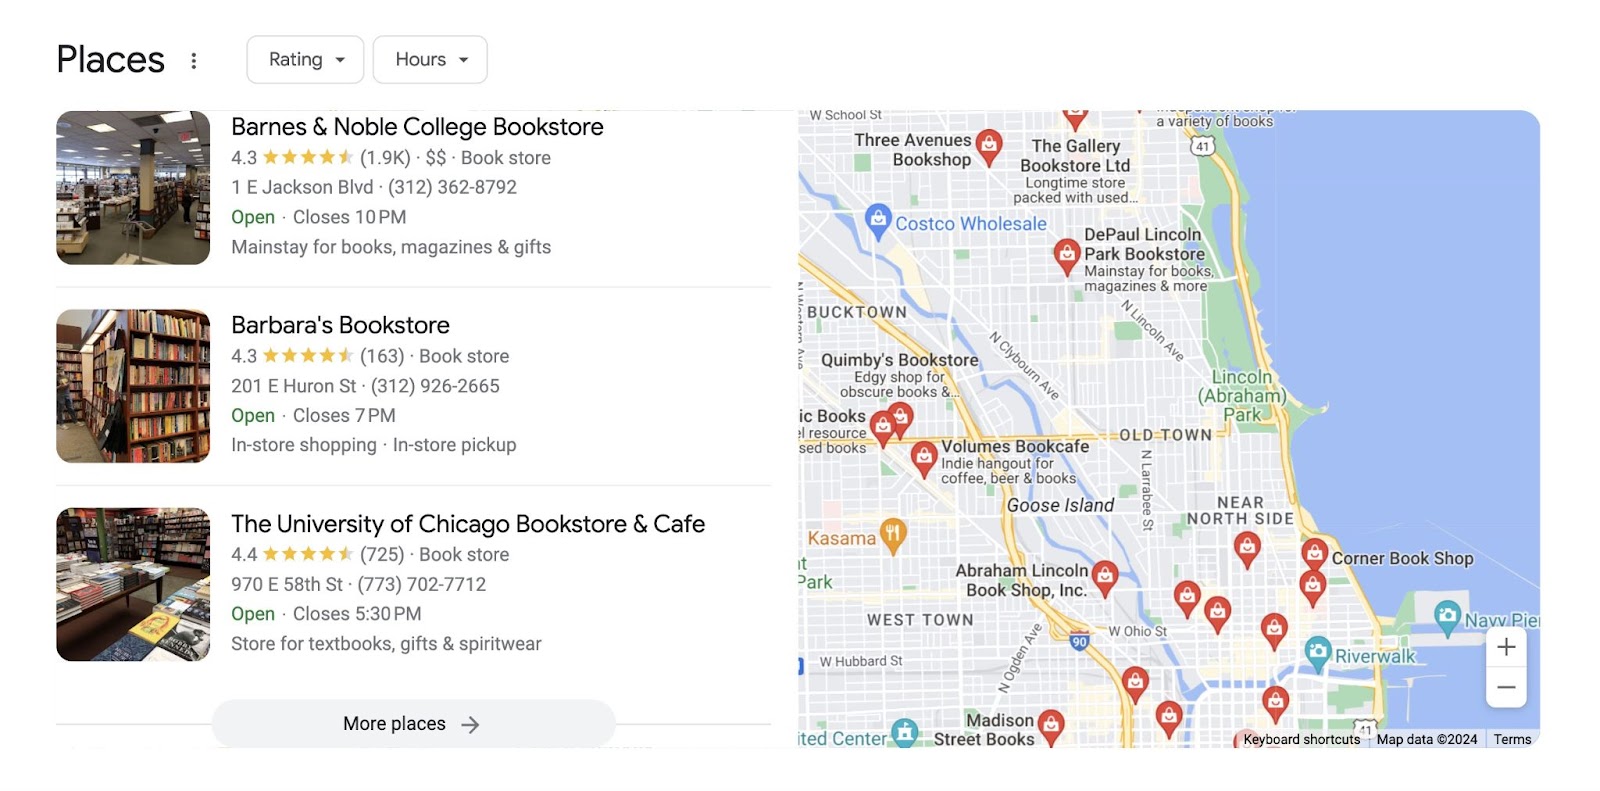 google results for chicago bookstore shows "Places" with map in the serp